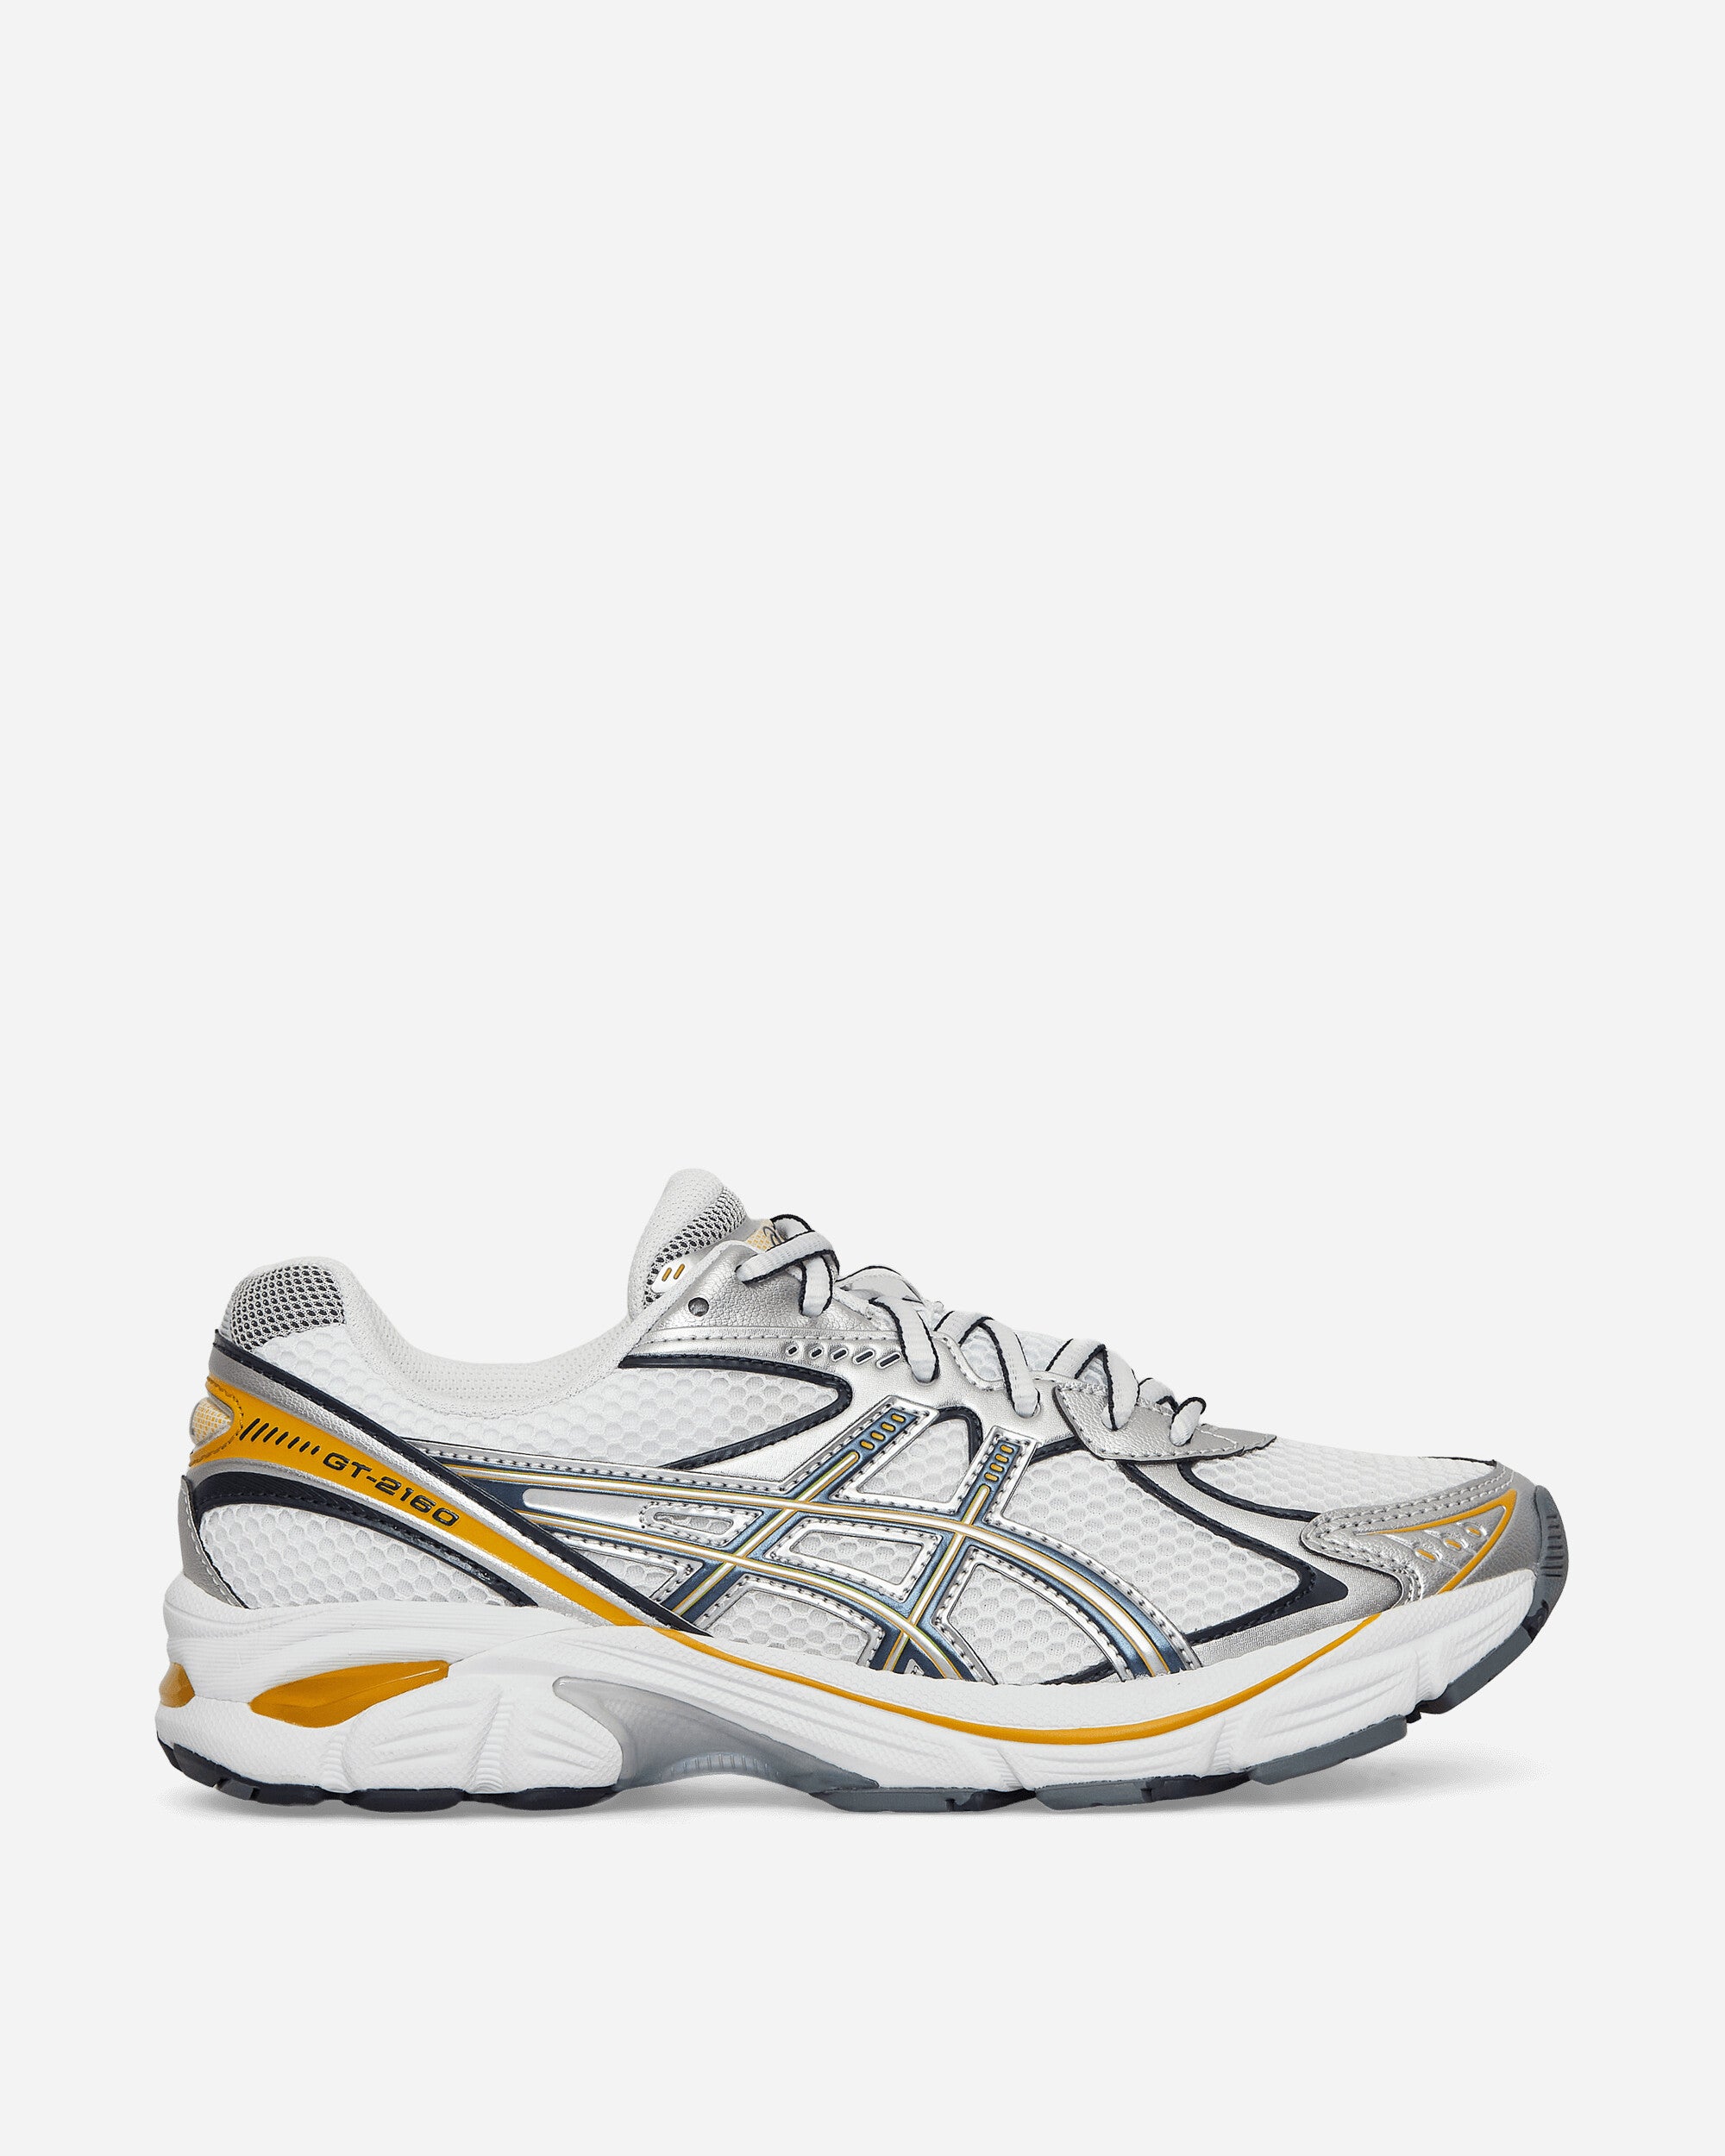 Asics Gt-2160 White/Pure Silver Sneakers Low 1203A275-102